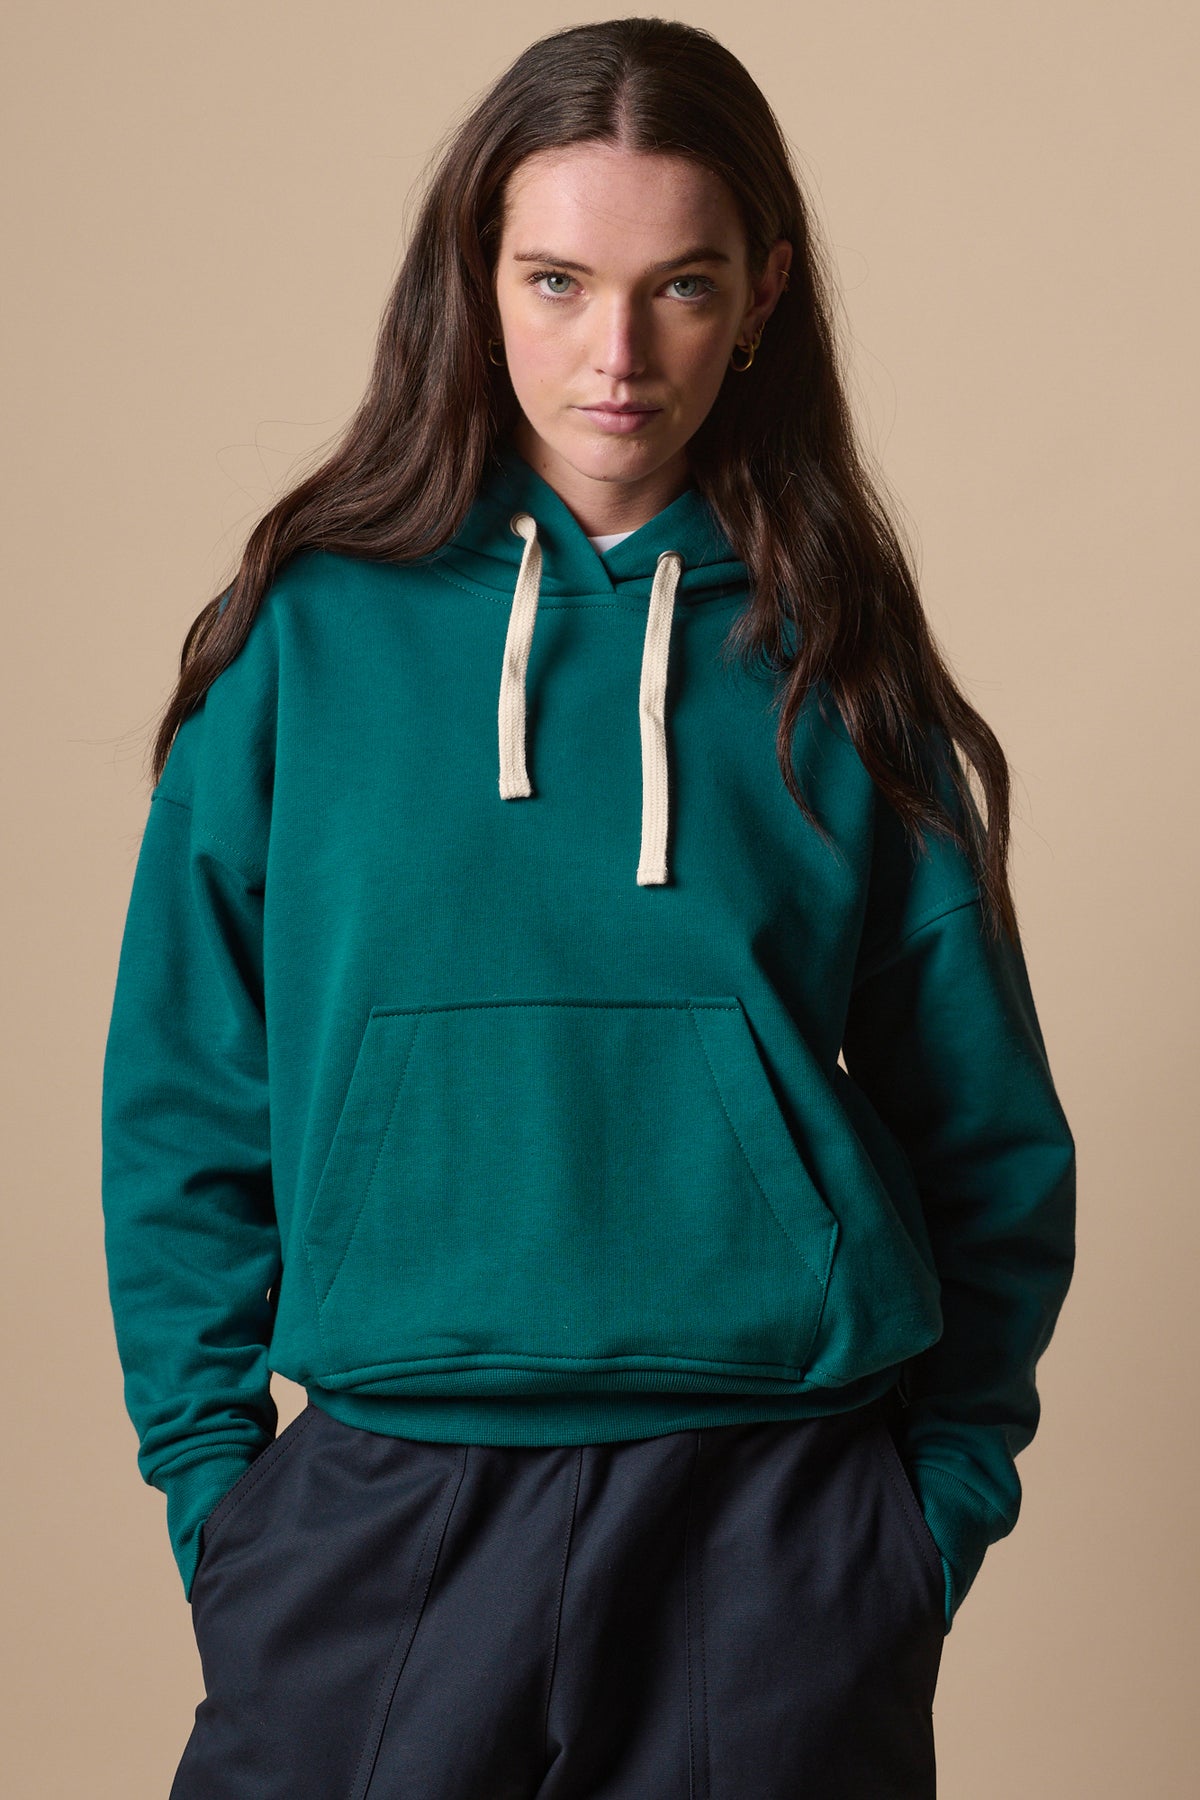 
            Thigh up image of white female wearing hooded sweatshirt in teal